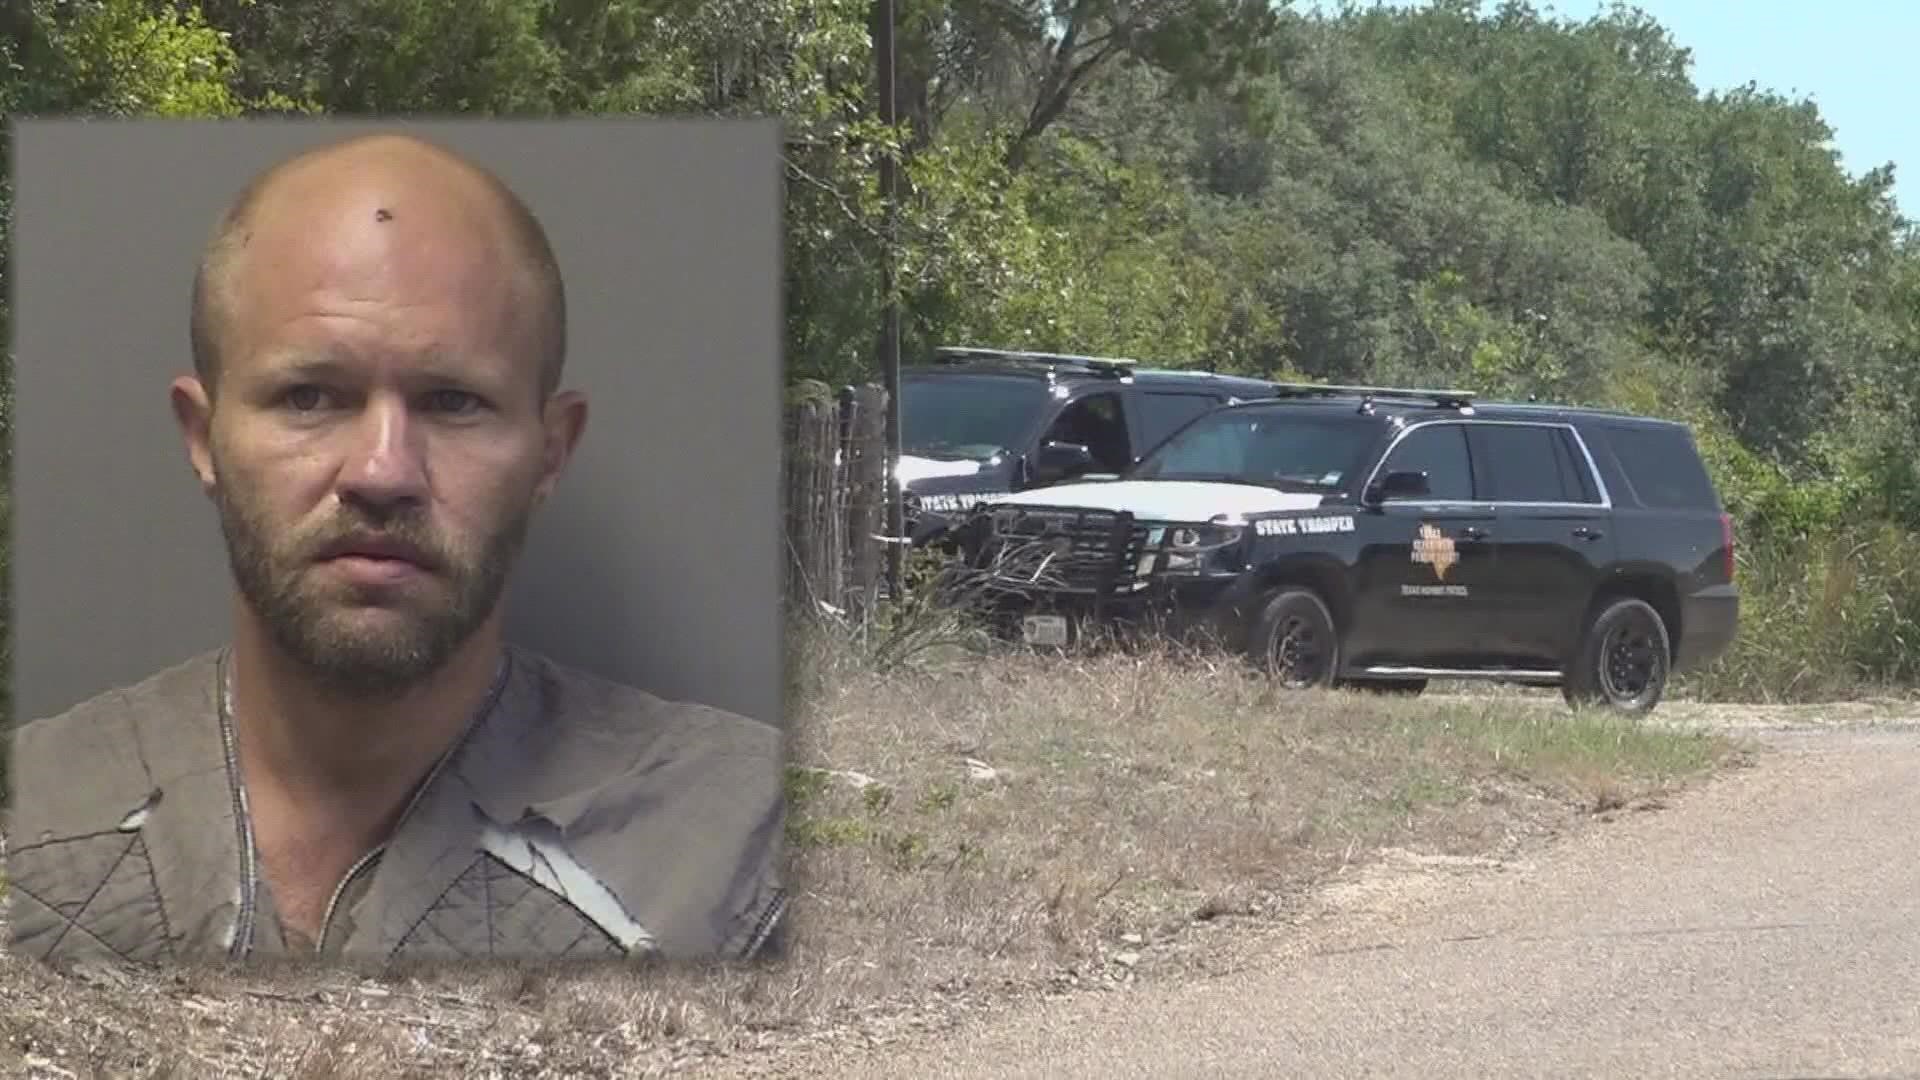 Hogan was put on Texas' 10 Most Wanted Fugitives list after he escaped on Sept. 26.